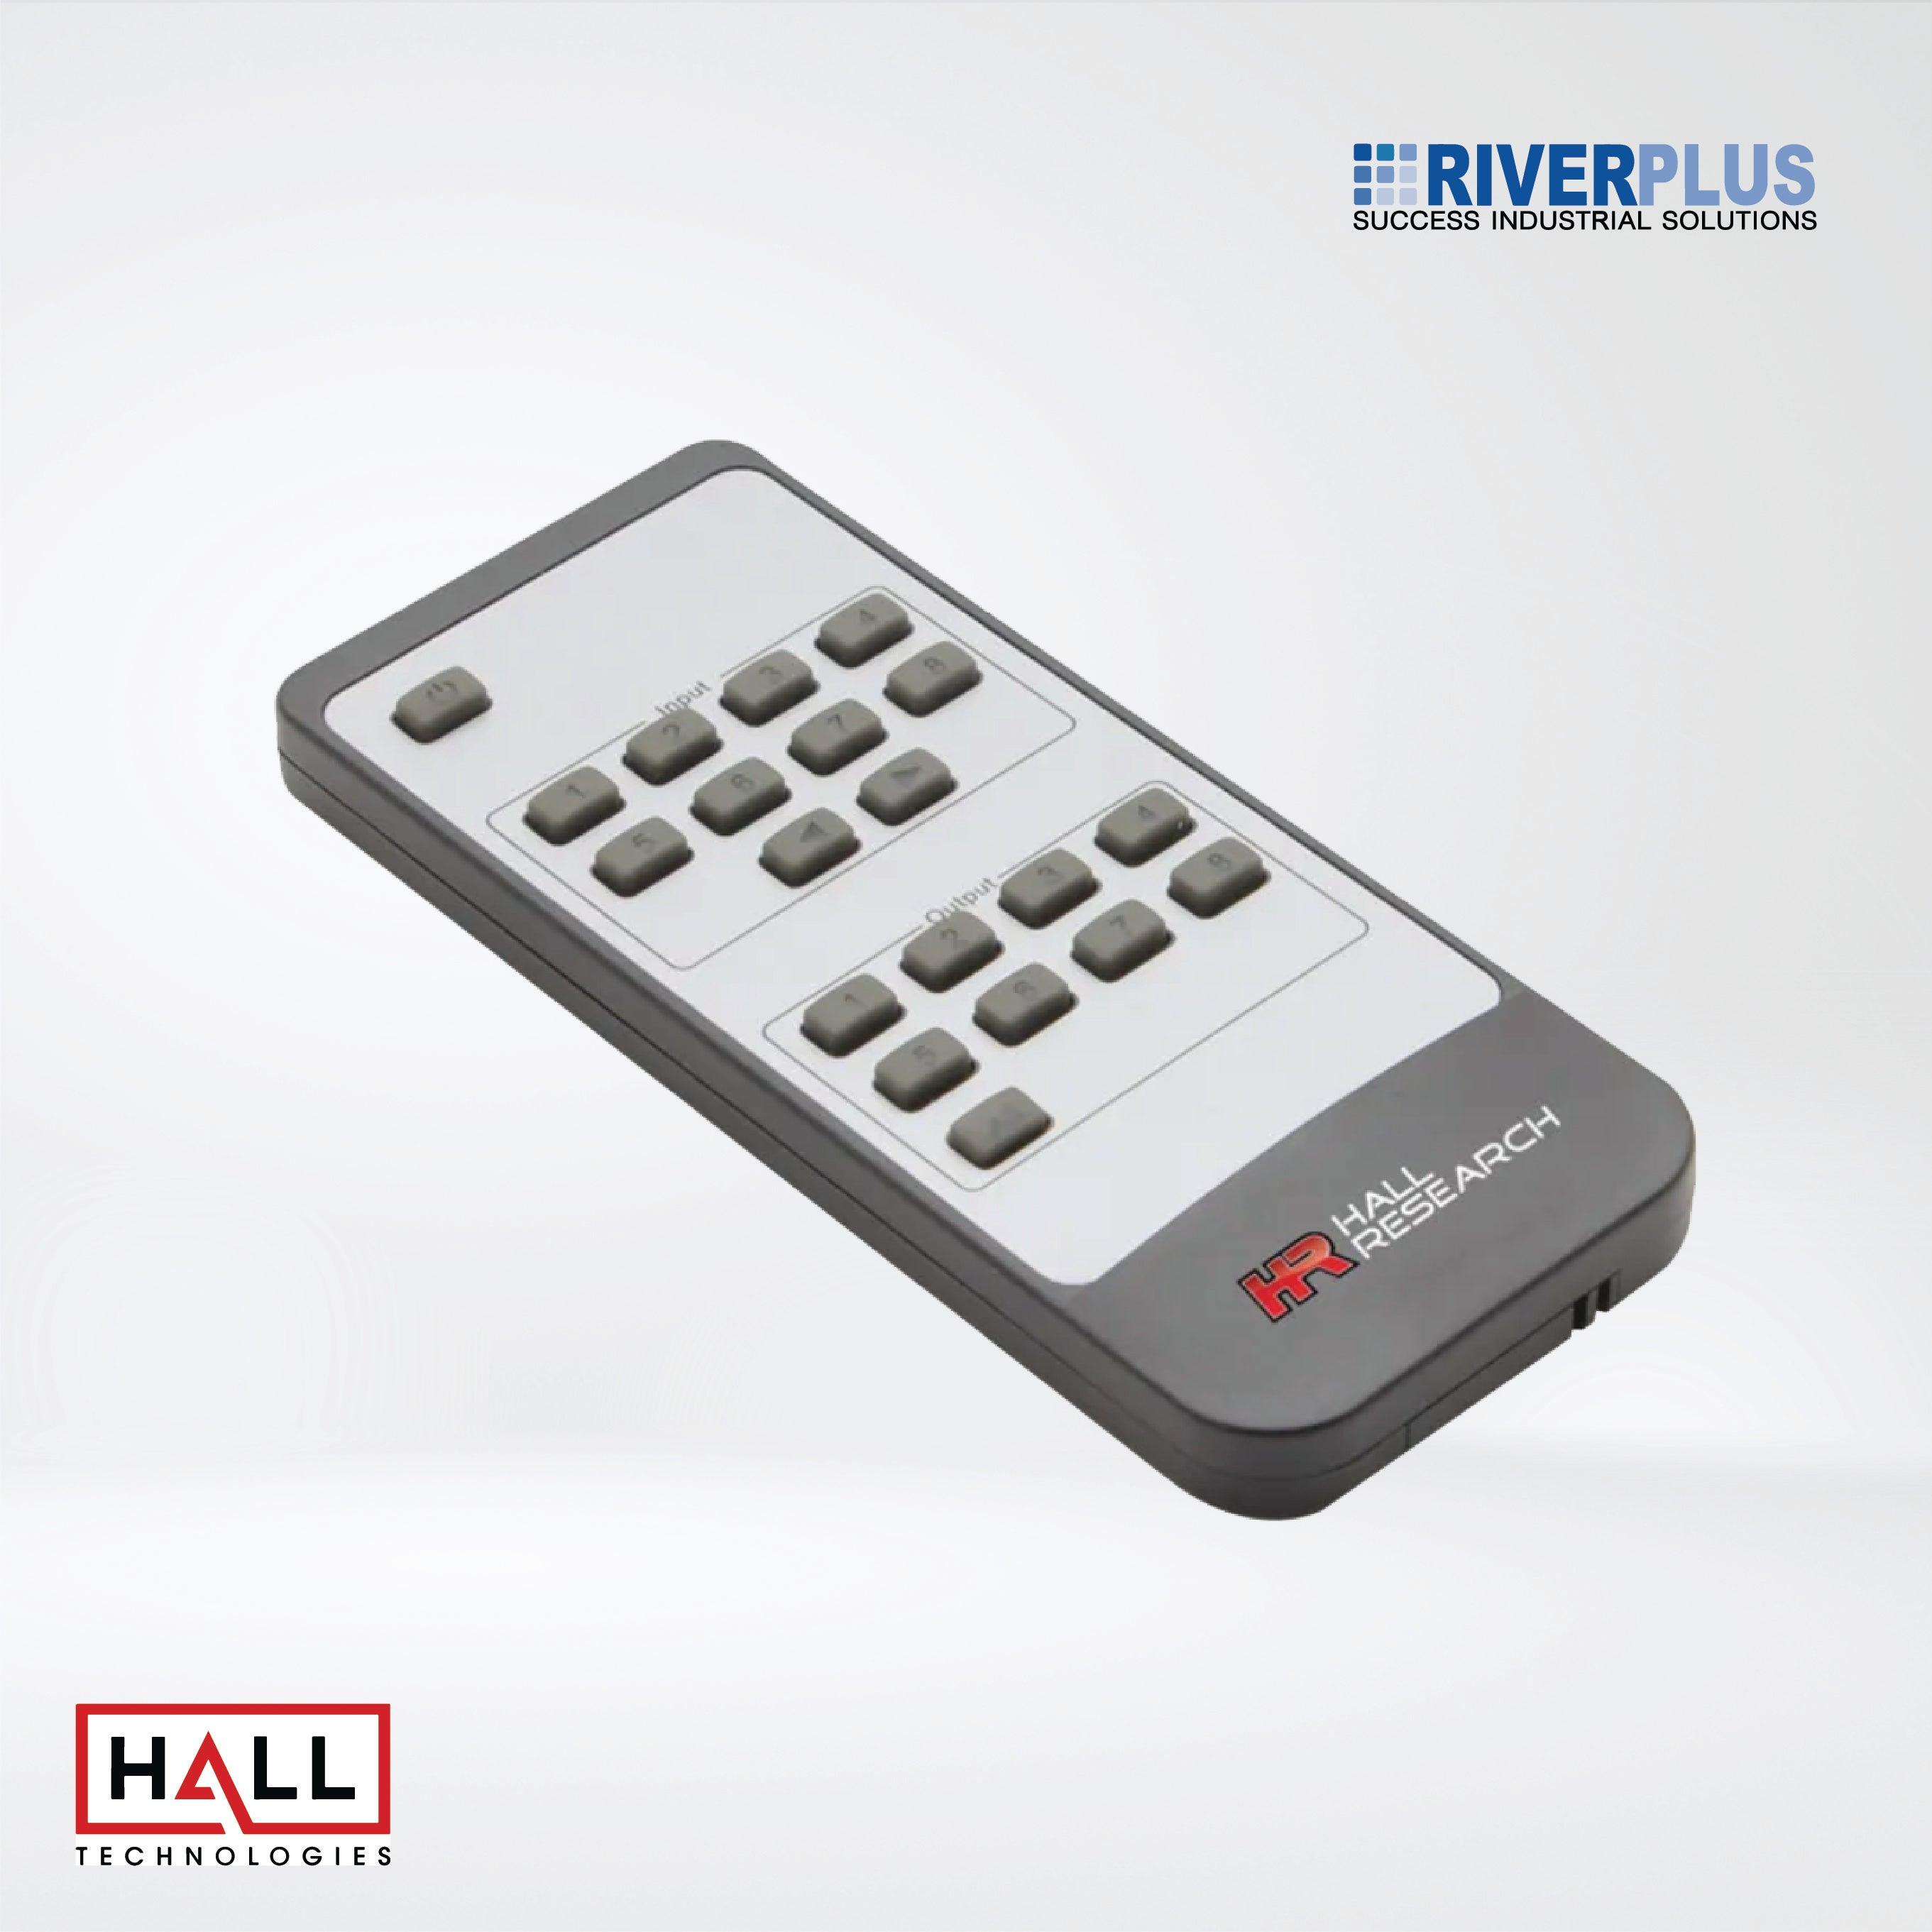 HSM-88-4K 4K 8X8 HDMI Matrix Switch with IR, RS-232, and IP Control - Riverplus